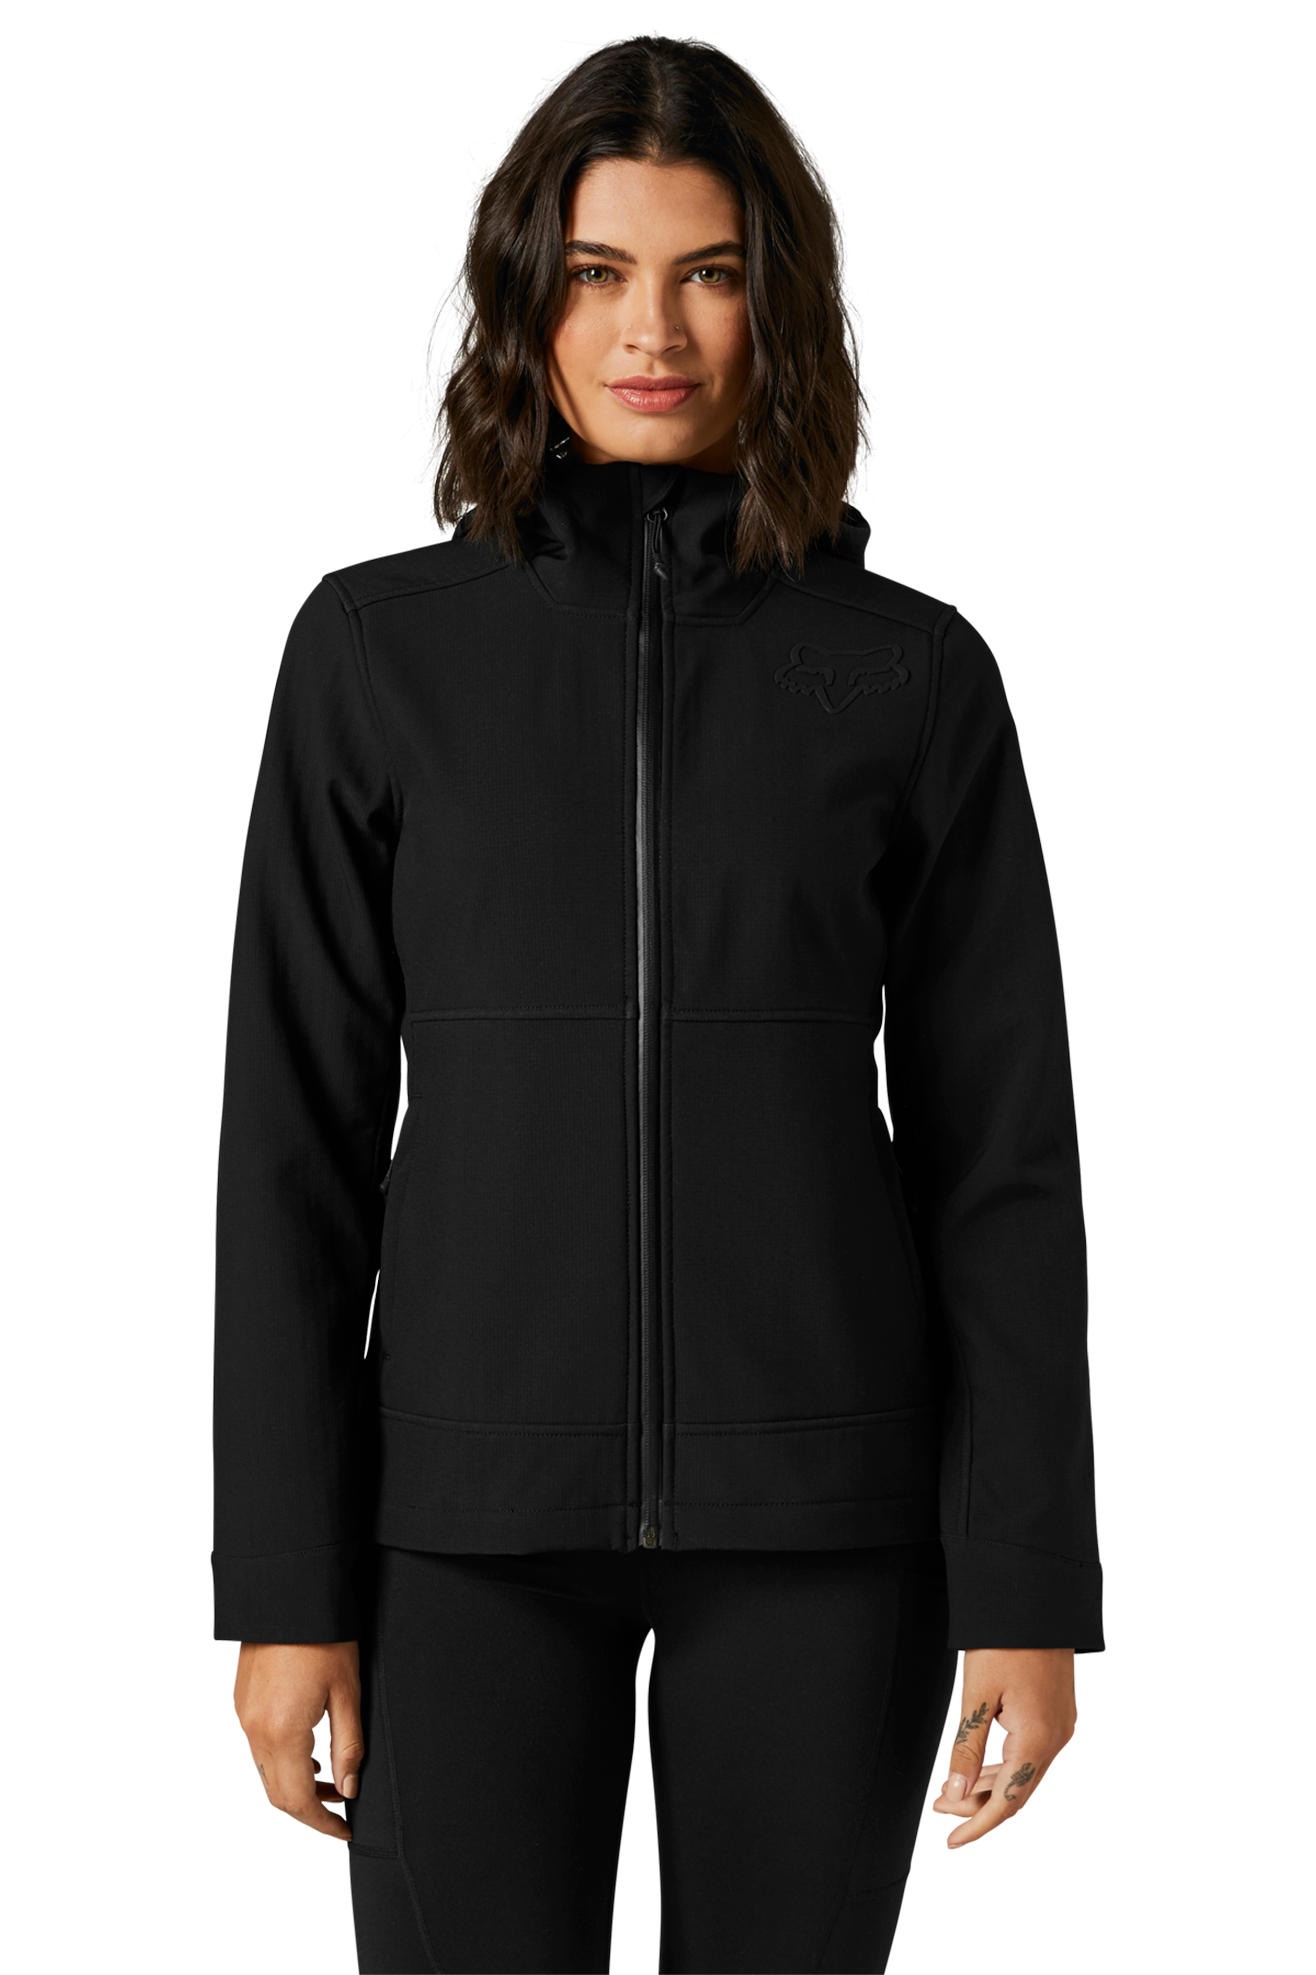 FOX Giacca Donna  Racing Pit Softshell Nera